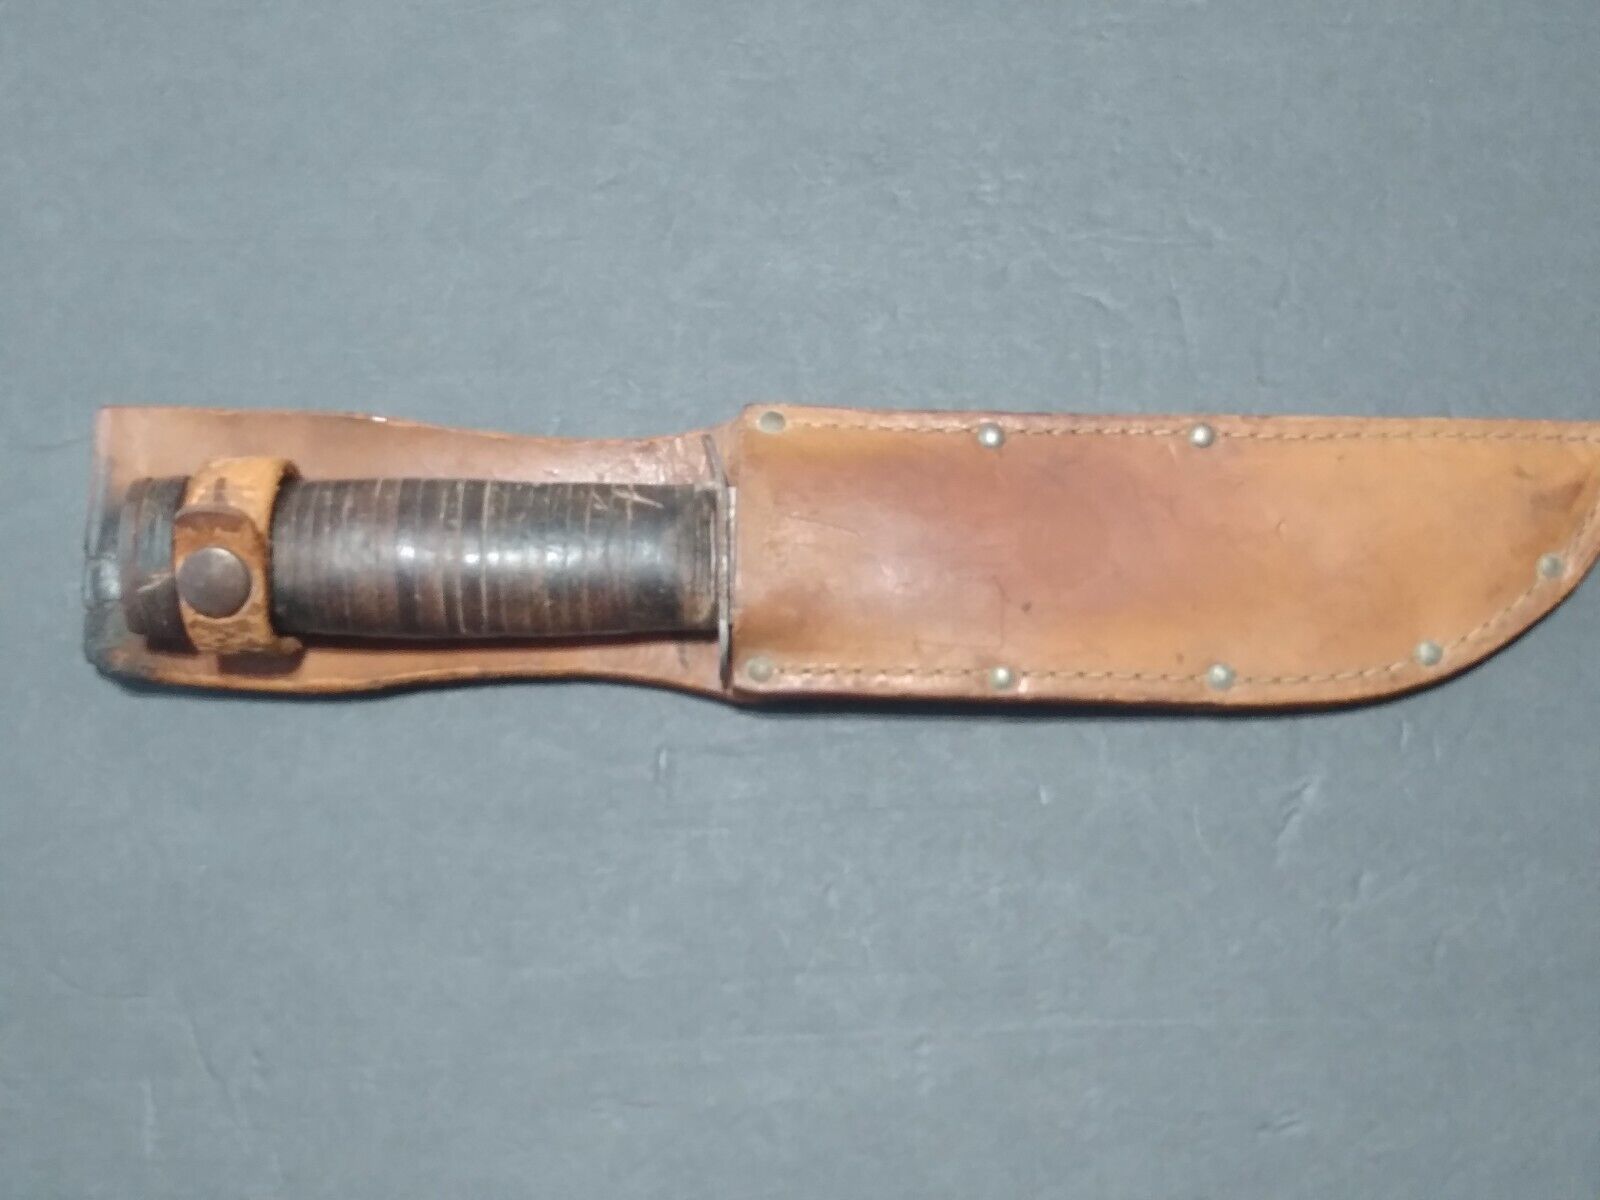 Rare Vintage US ARMY USMC MARINE WWII QUEEN CITY FIGHTING COMBAT KNIFE & SHEATH